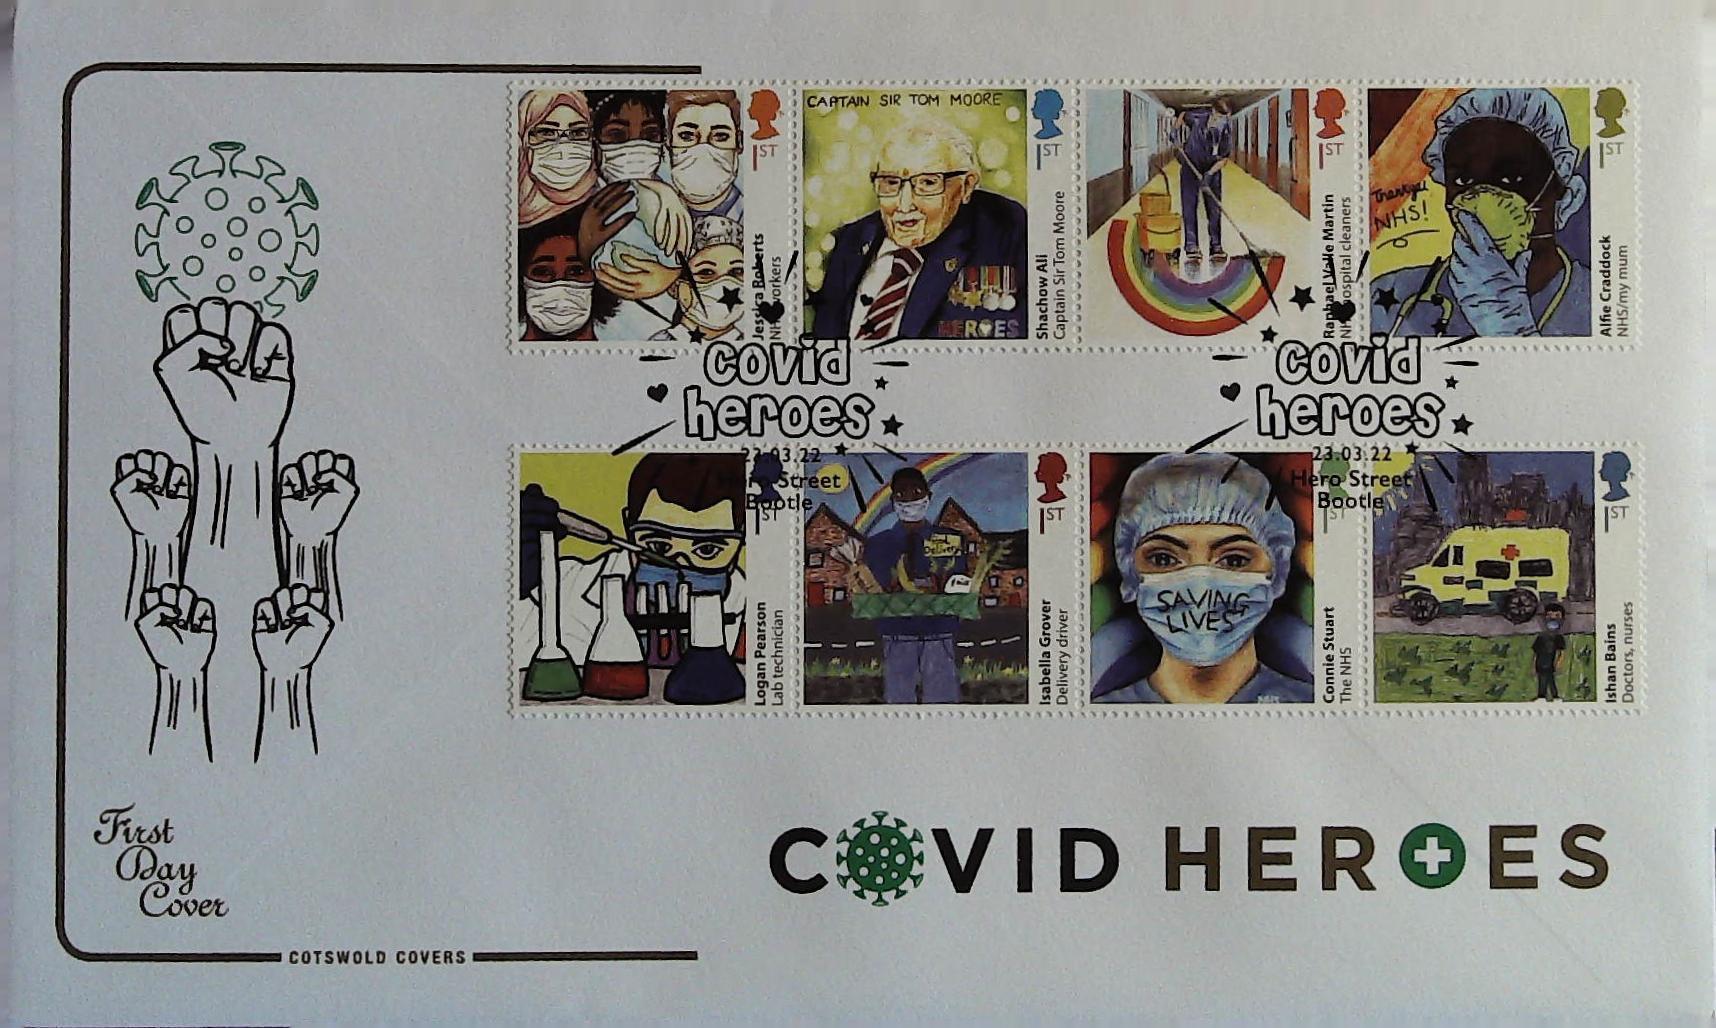 2022 COVID HEROES - COTSWOLD FDC -COVID HEROES HERO STREET BOOTLE POSTMARK - Click Image to Close